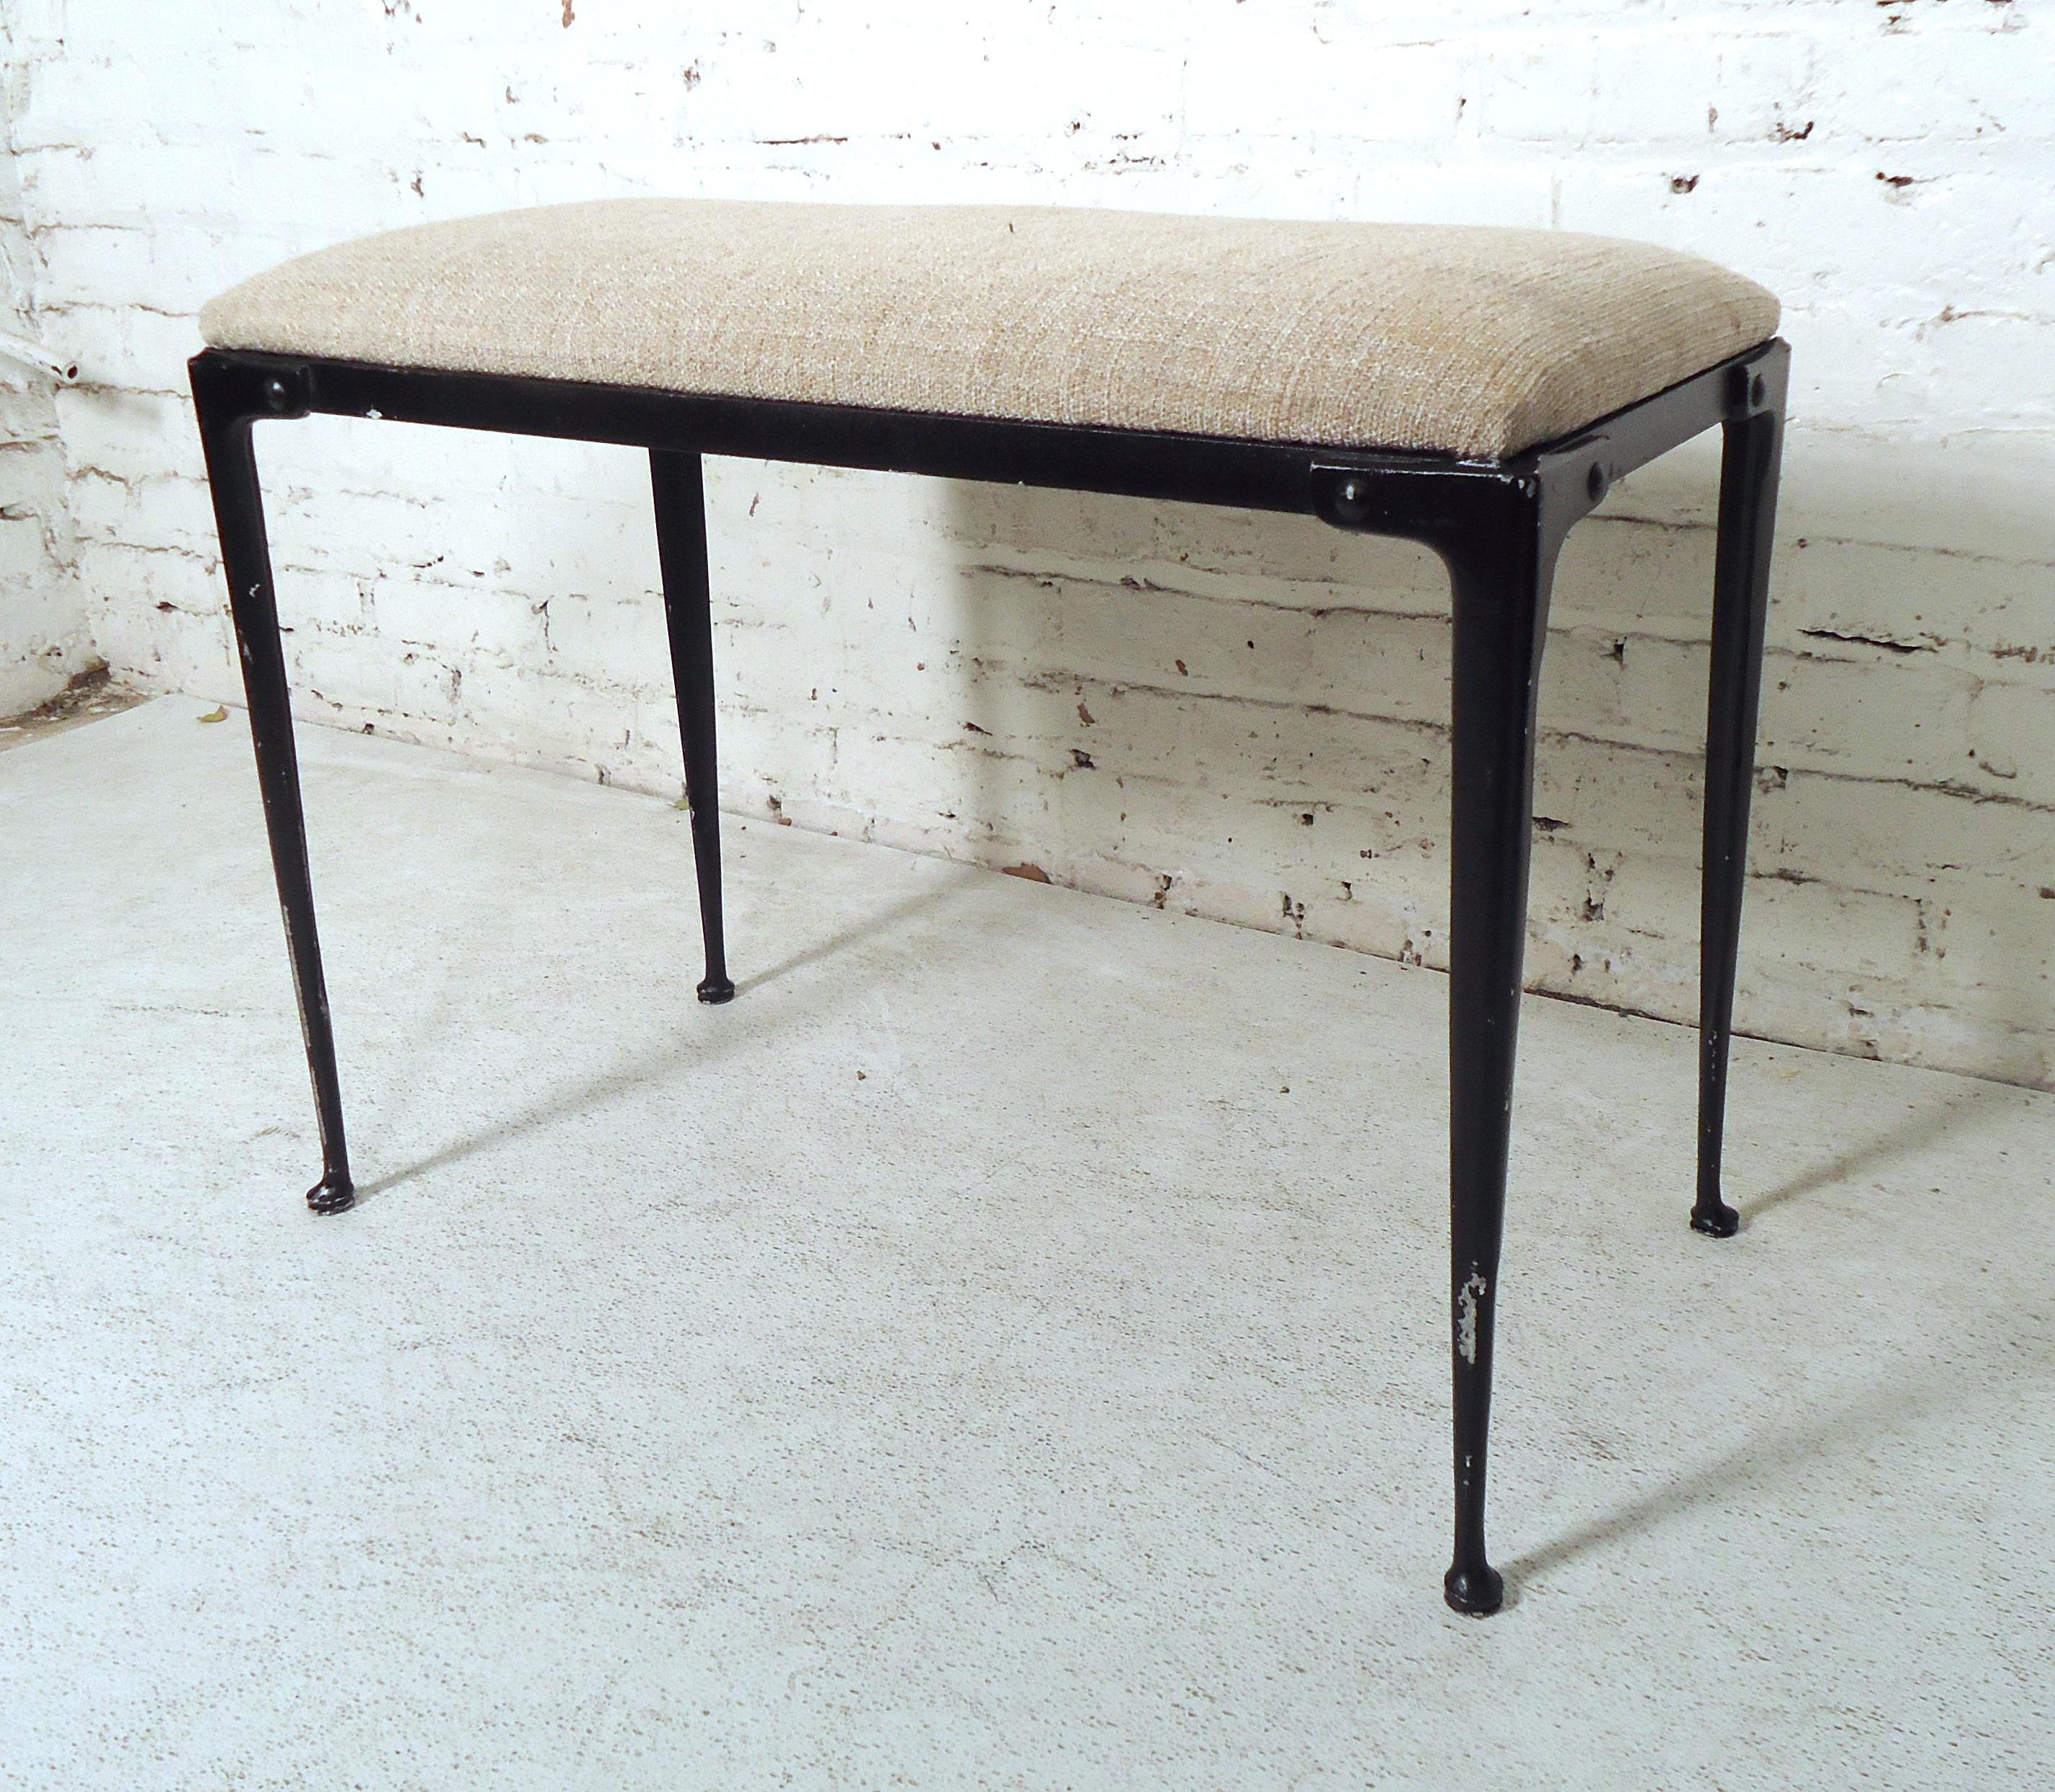 Vintage light upholstered bench restored in a black metal finish. Would give a sleek look to home or office.

(Please confirm item location - NY or NJ).